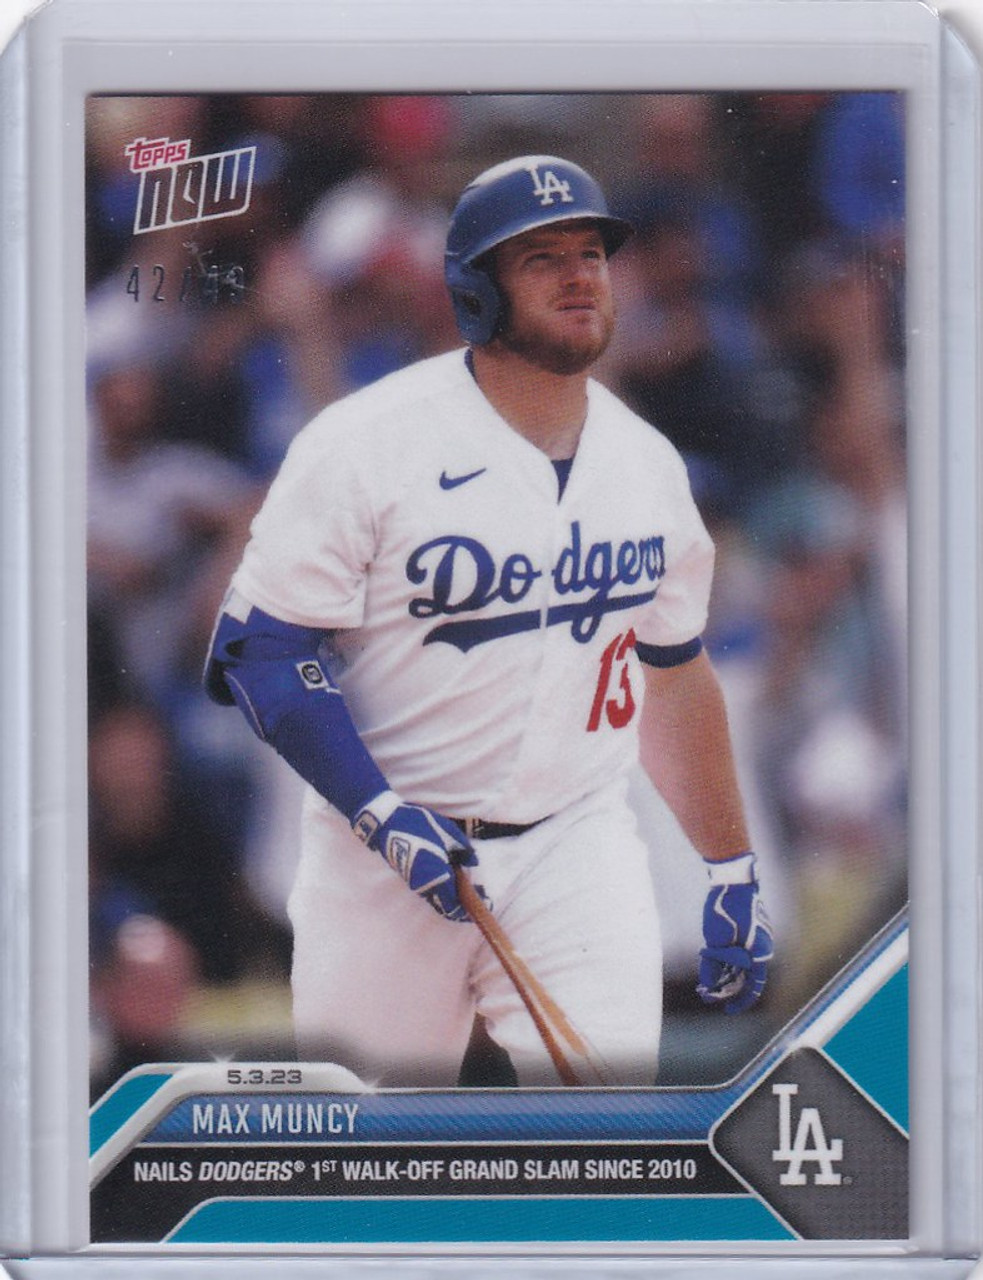 2023 TOPPS NOW PARALLEL #229 MAX MUNCY LOS ANGELES DODGERS 42/49